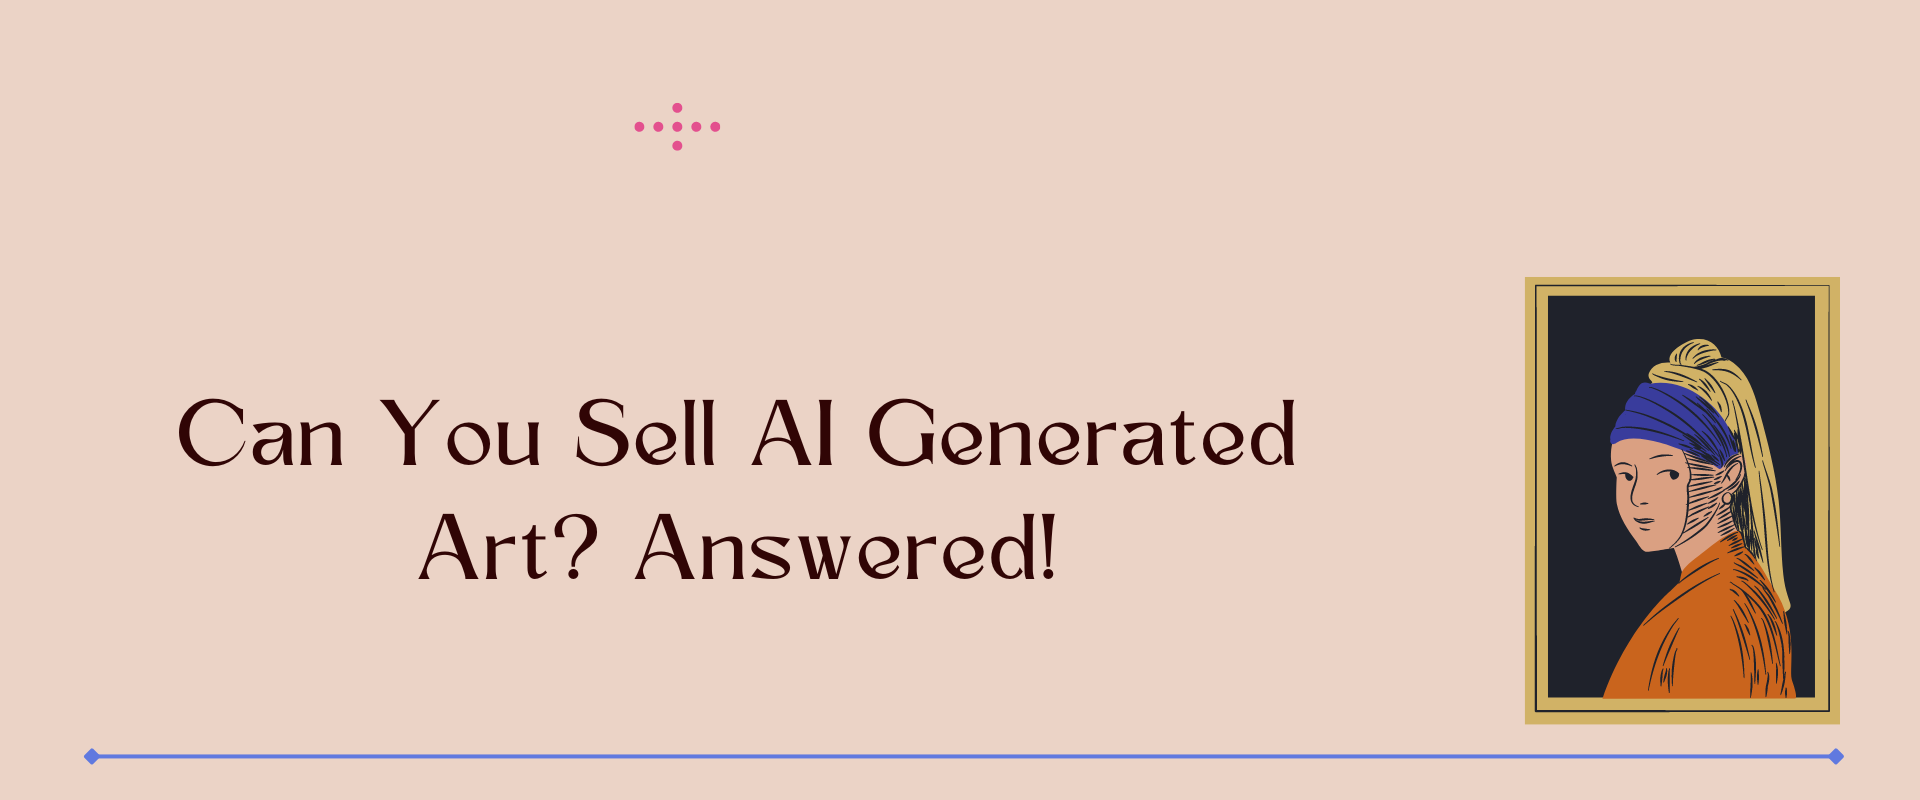 Can You Sell AI Generated Art? Situations to Avoid